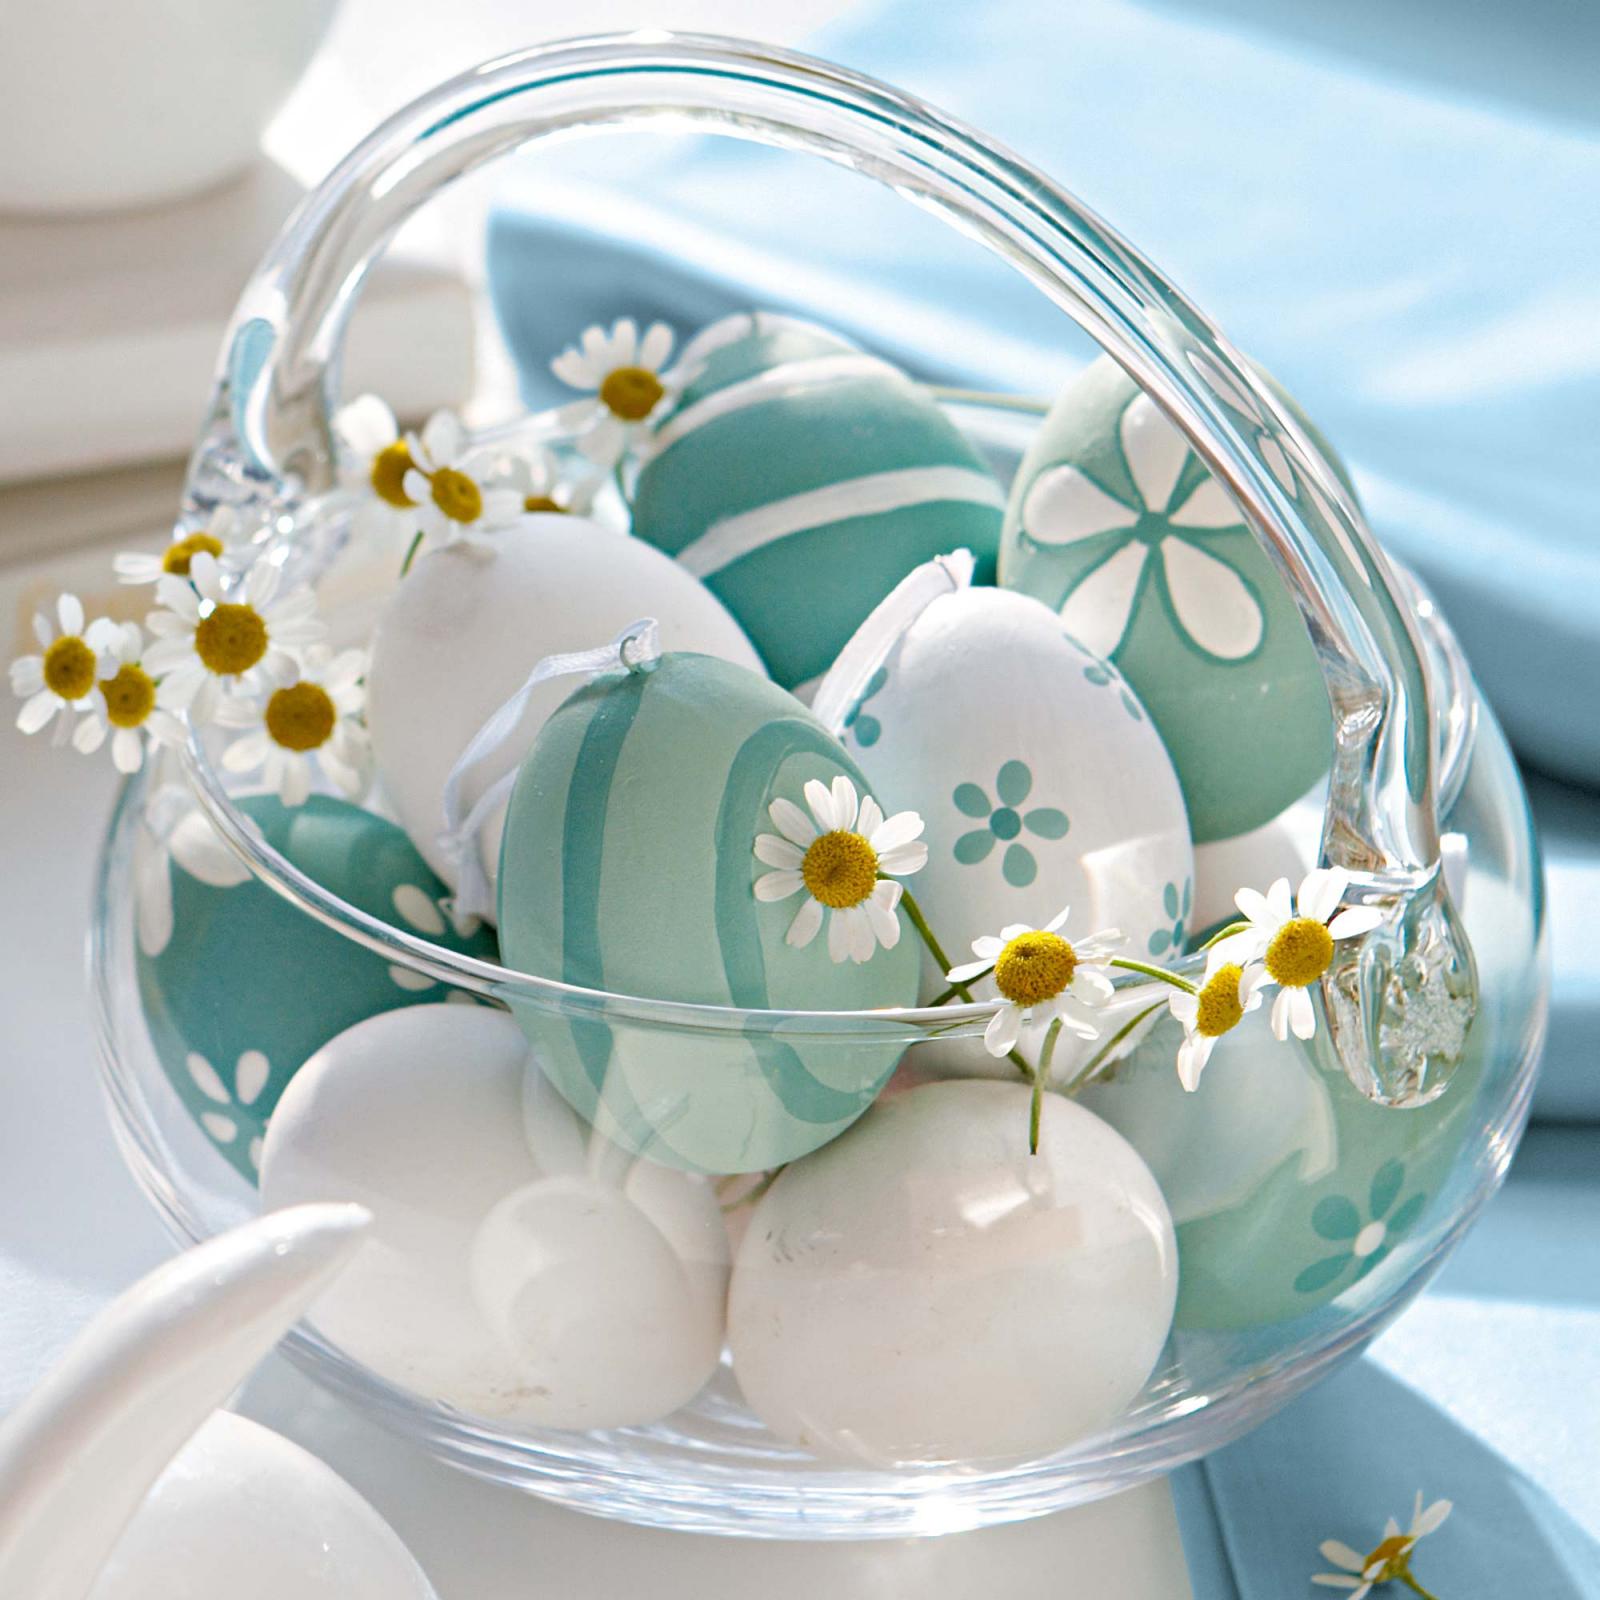 A glass bowl filled with Easter eggs and daisies.